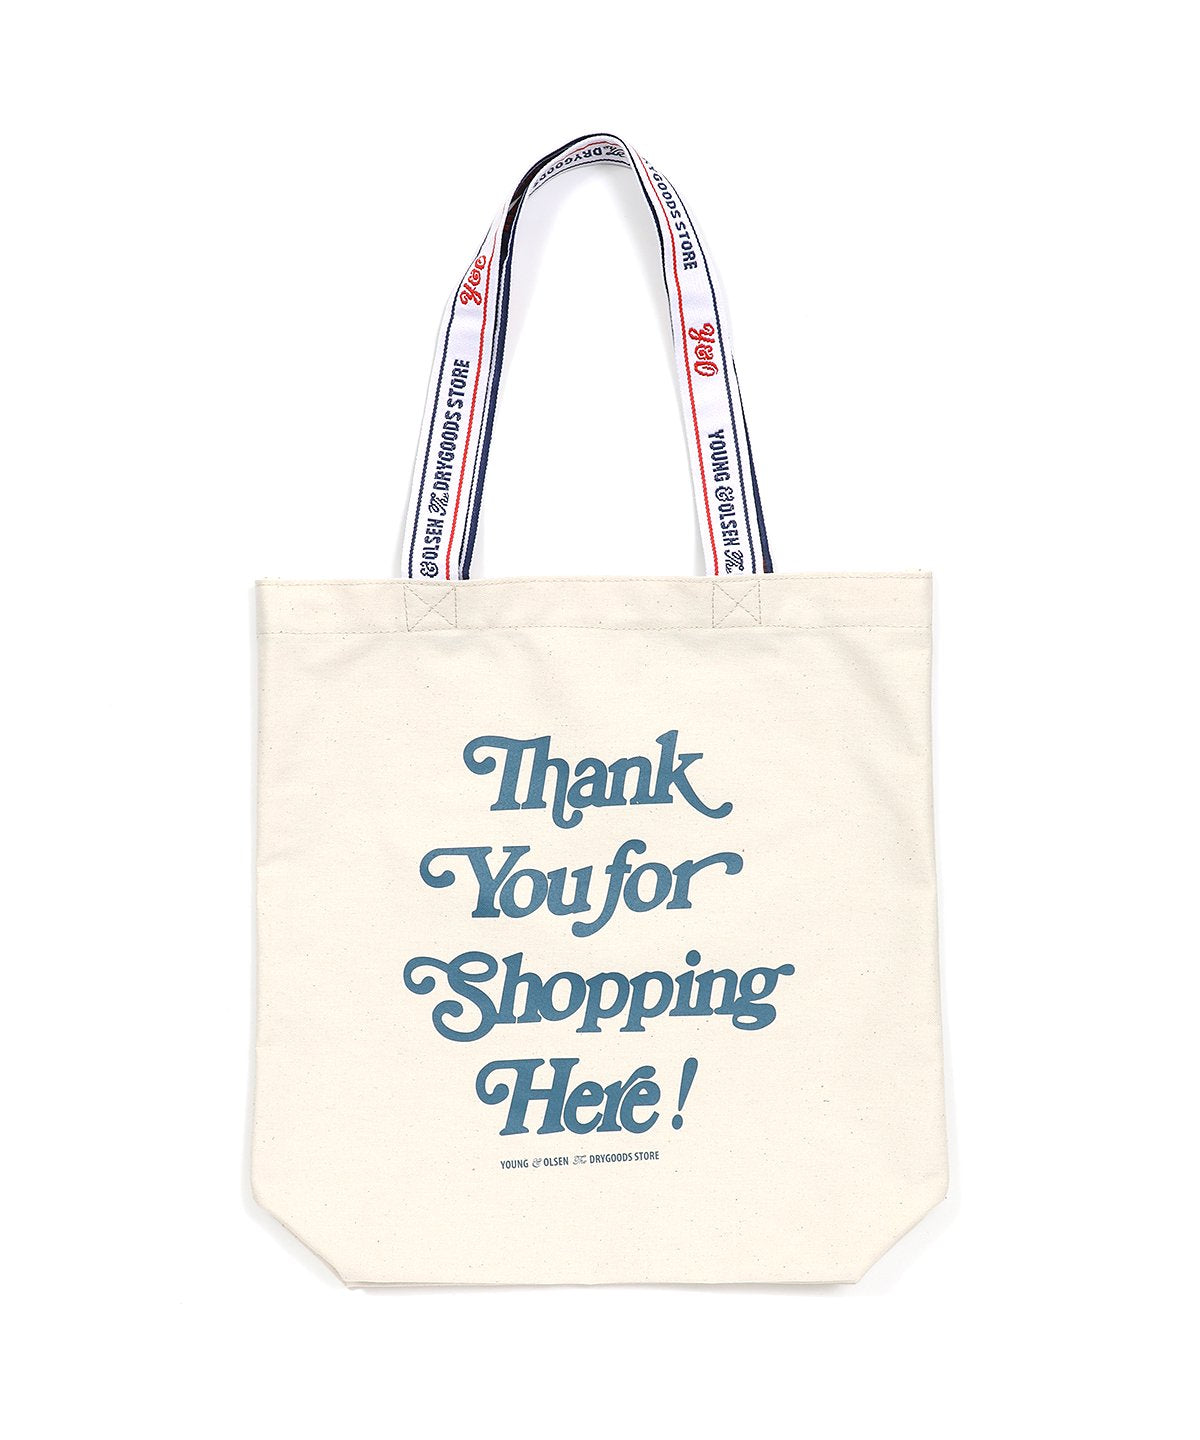 THANK YOU 4 SHOPPING TOTE